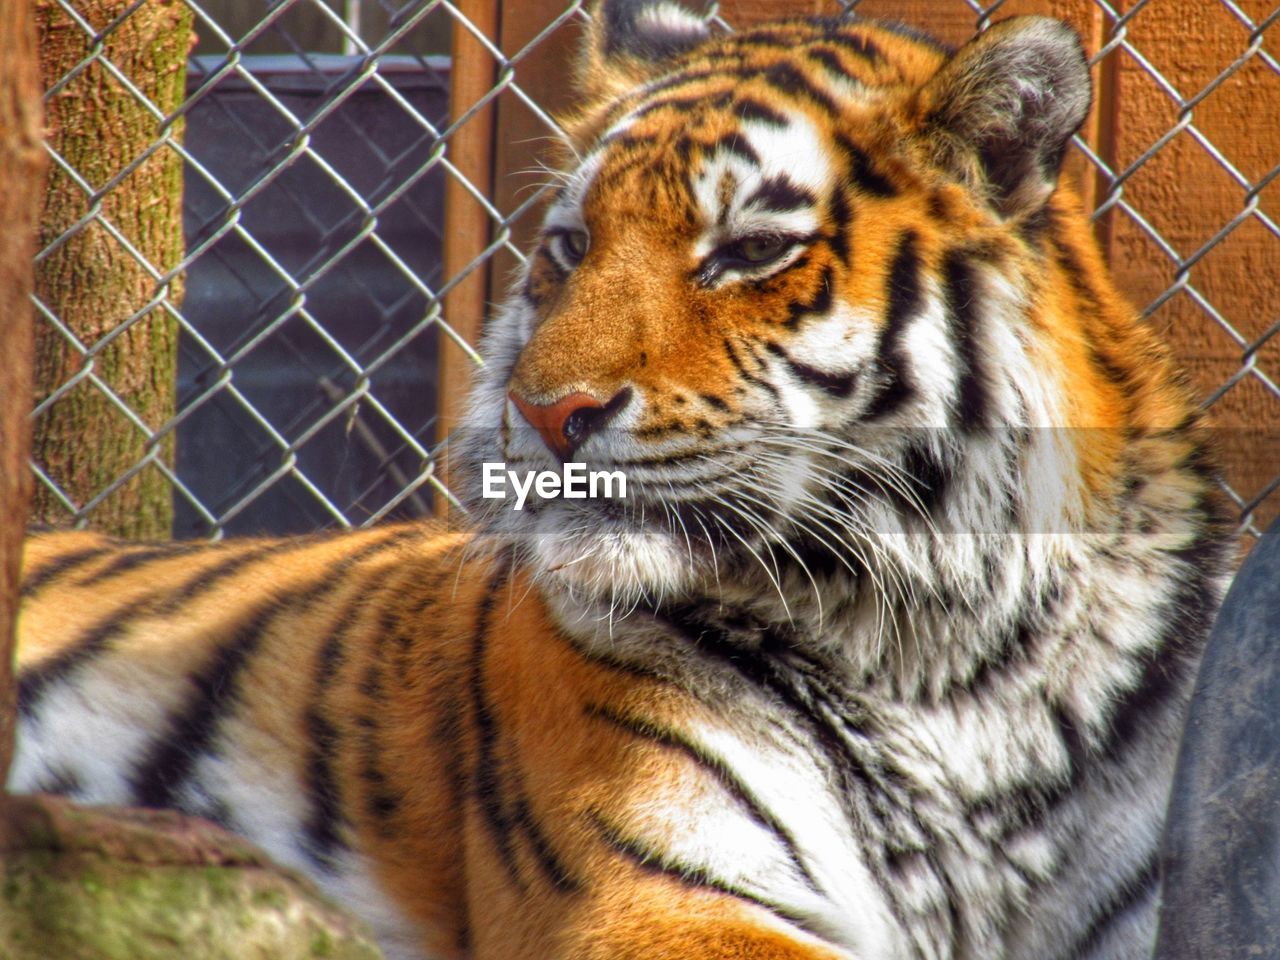 CLOSE-UP OF TIGER IN CAGE IN ZOO